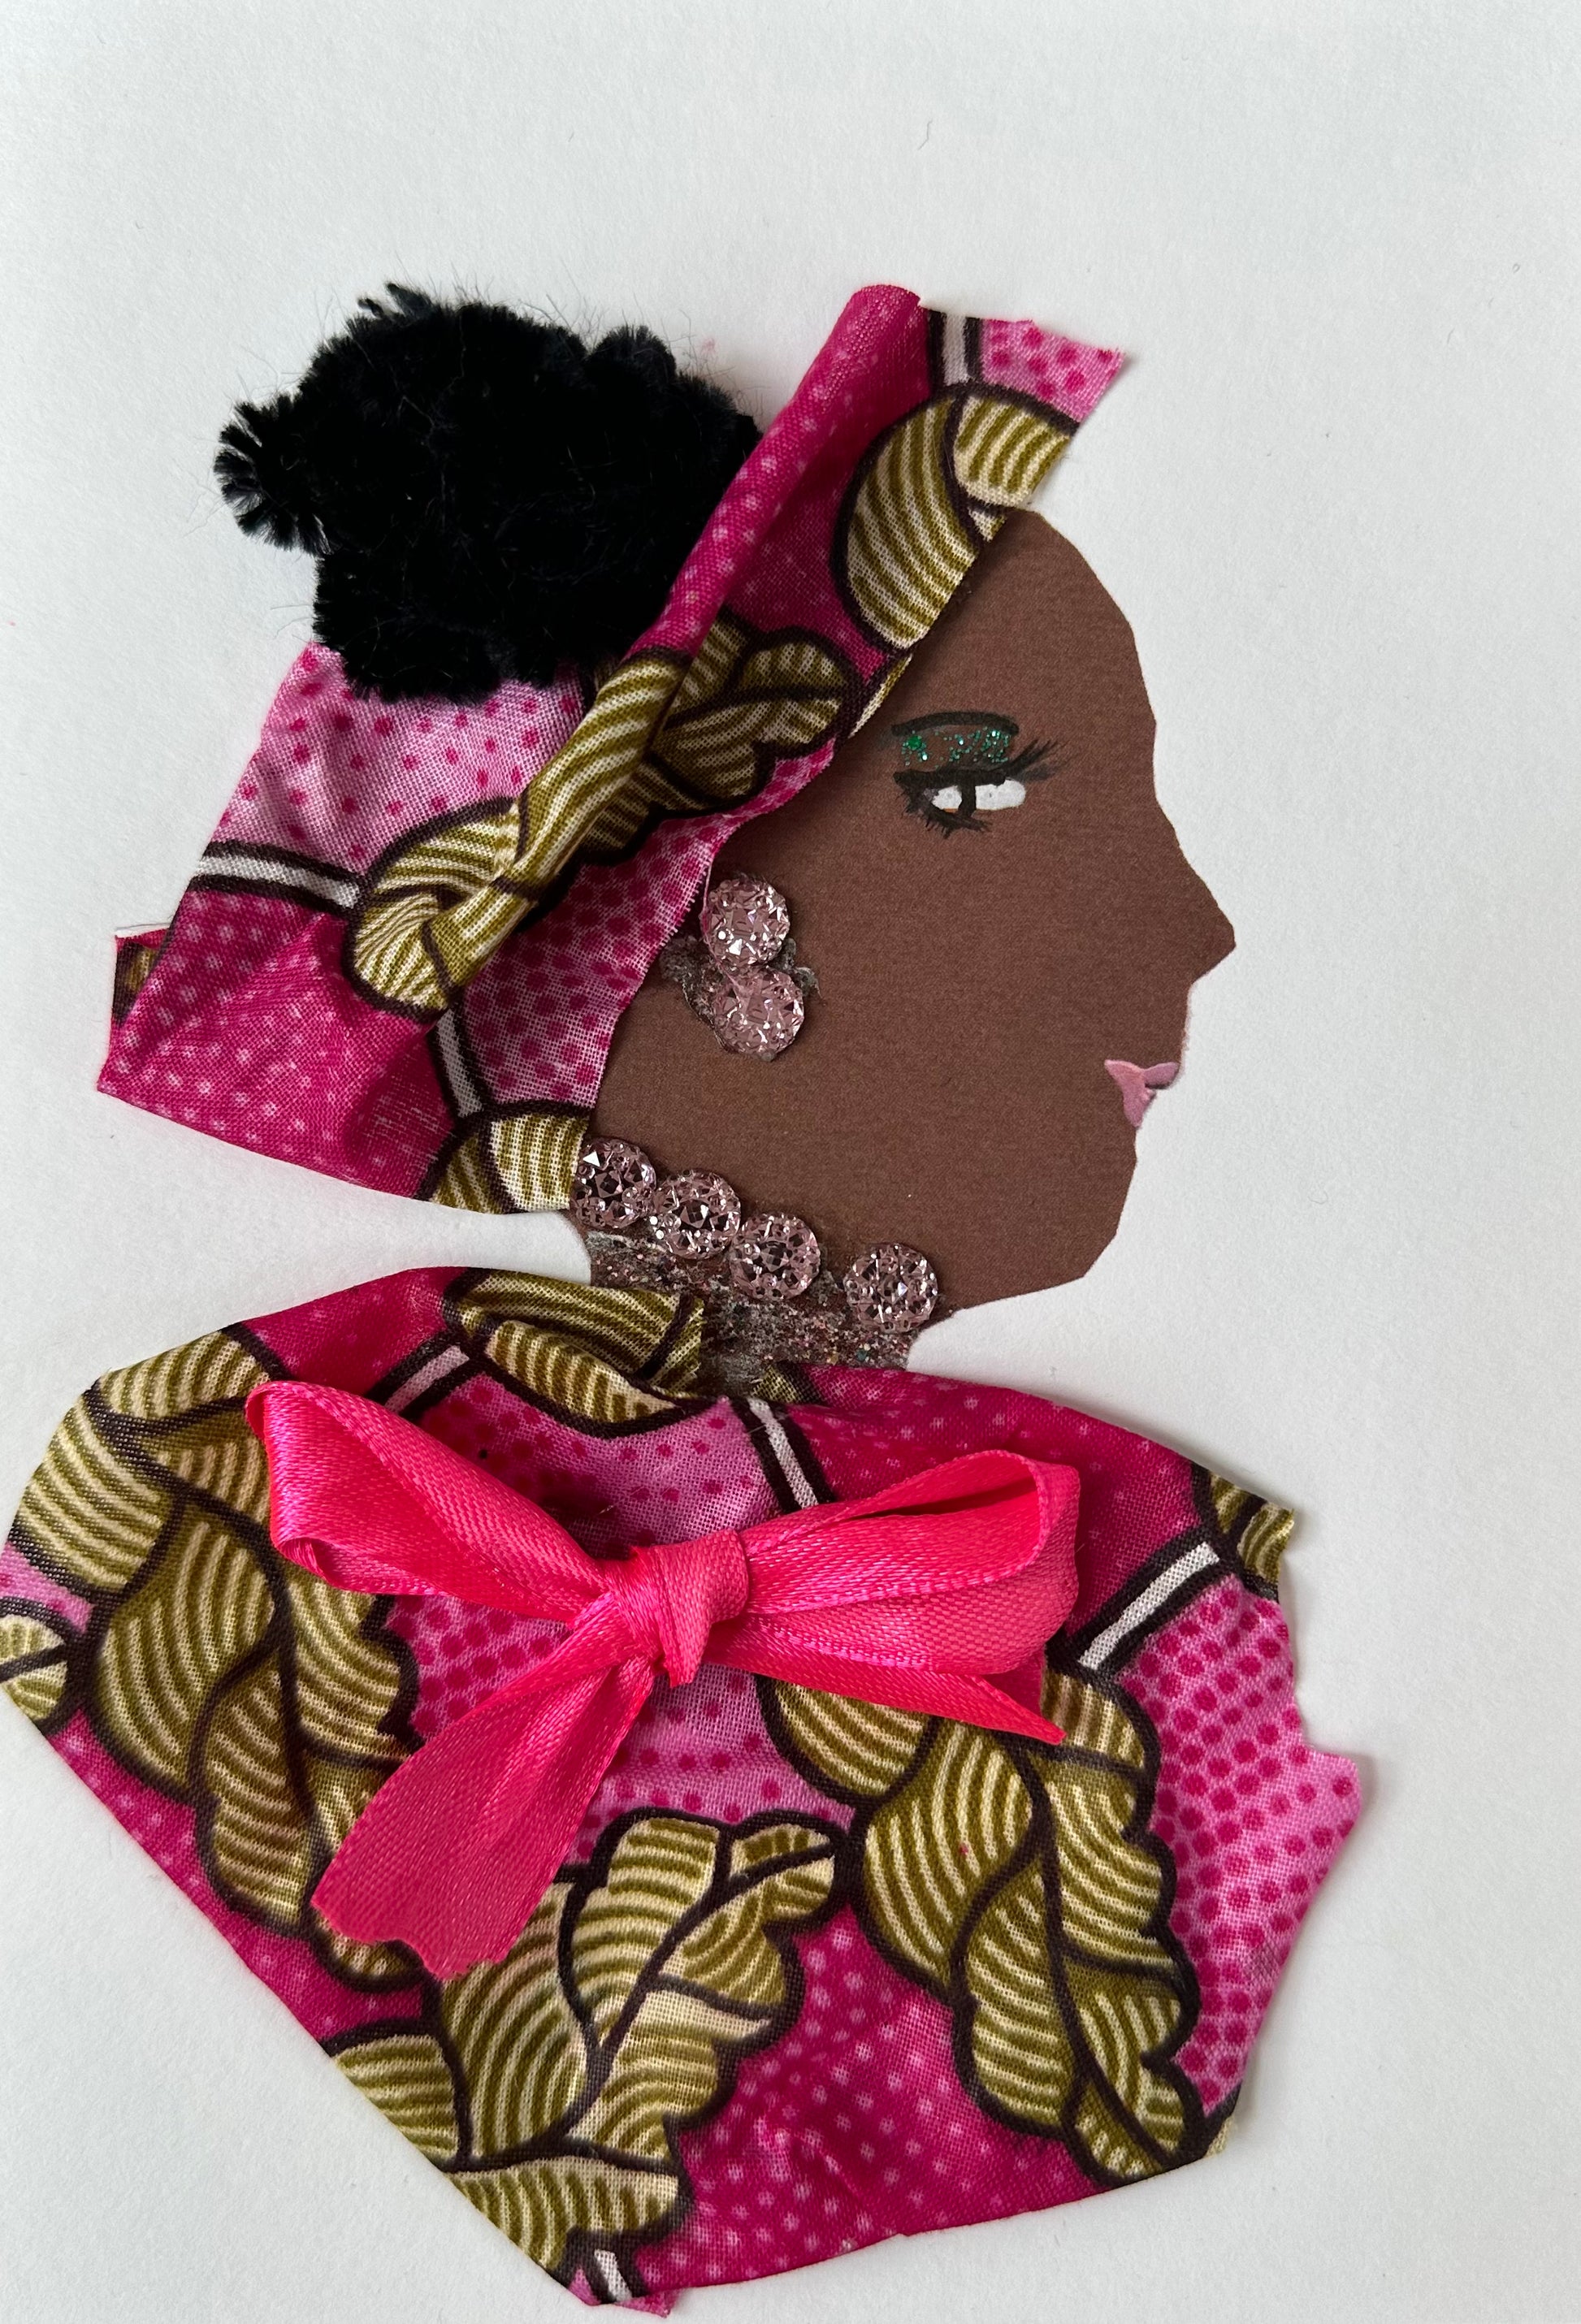 I designed this handmade card of a woman wearing a pink patterned blouse and hatinator with walnut coloured accents. She has a bright pink bow in the center of her blouse. Her earrings and necklace match with the soft pink colour. 